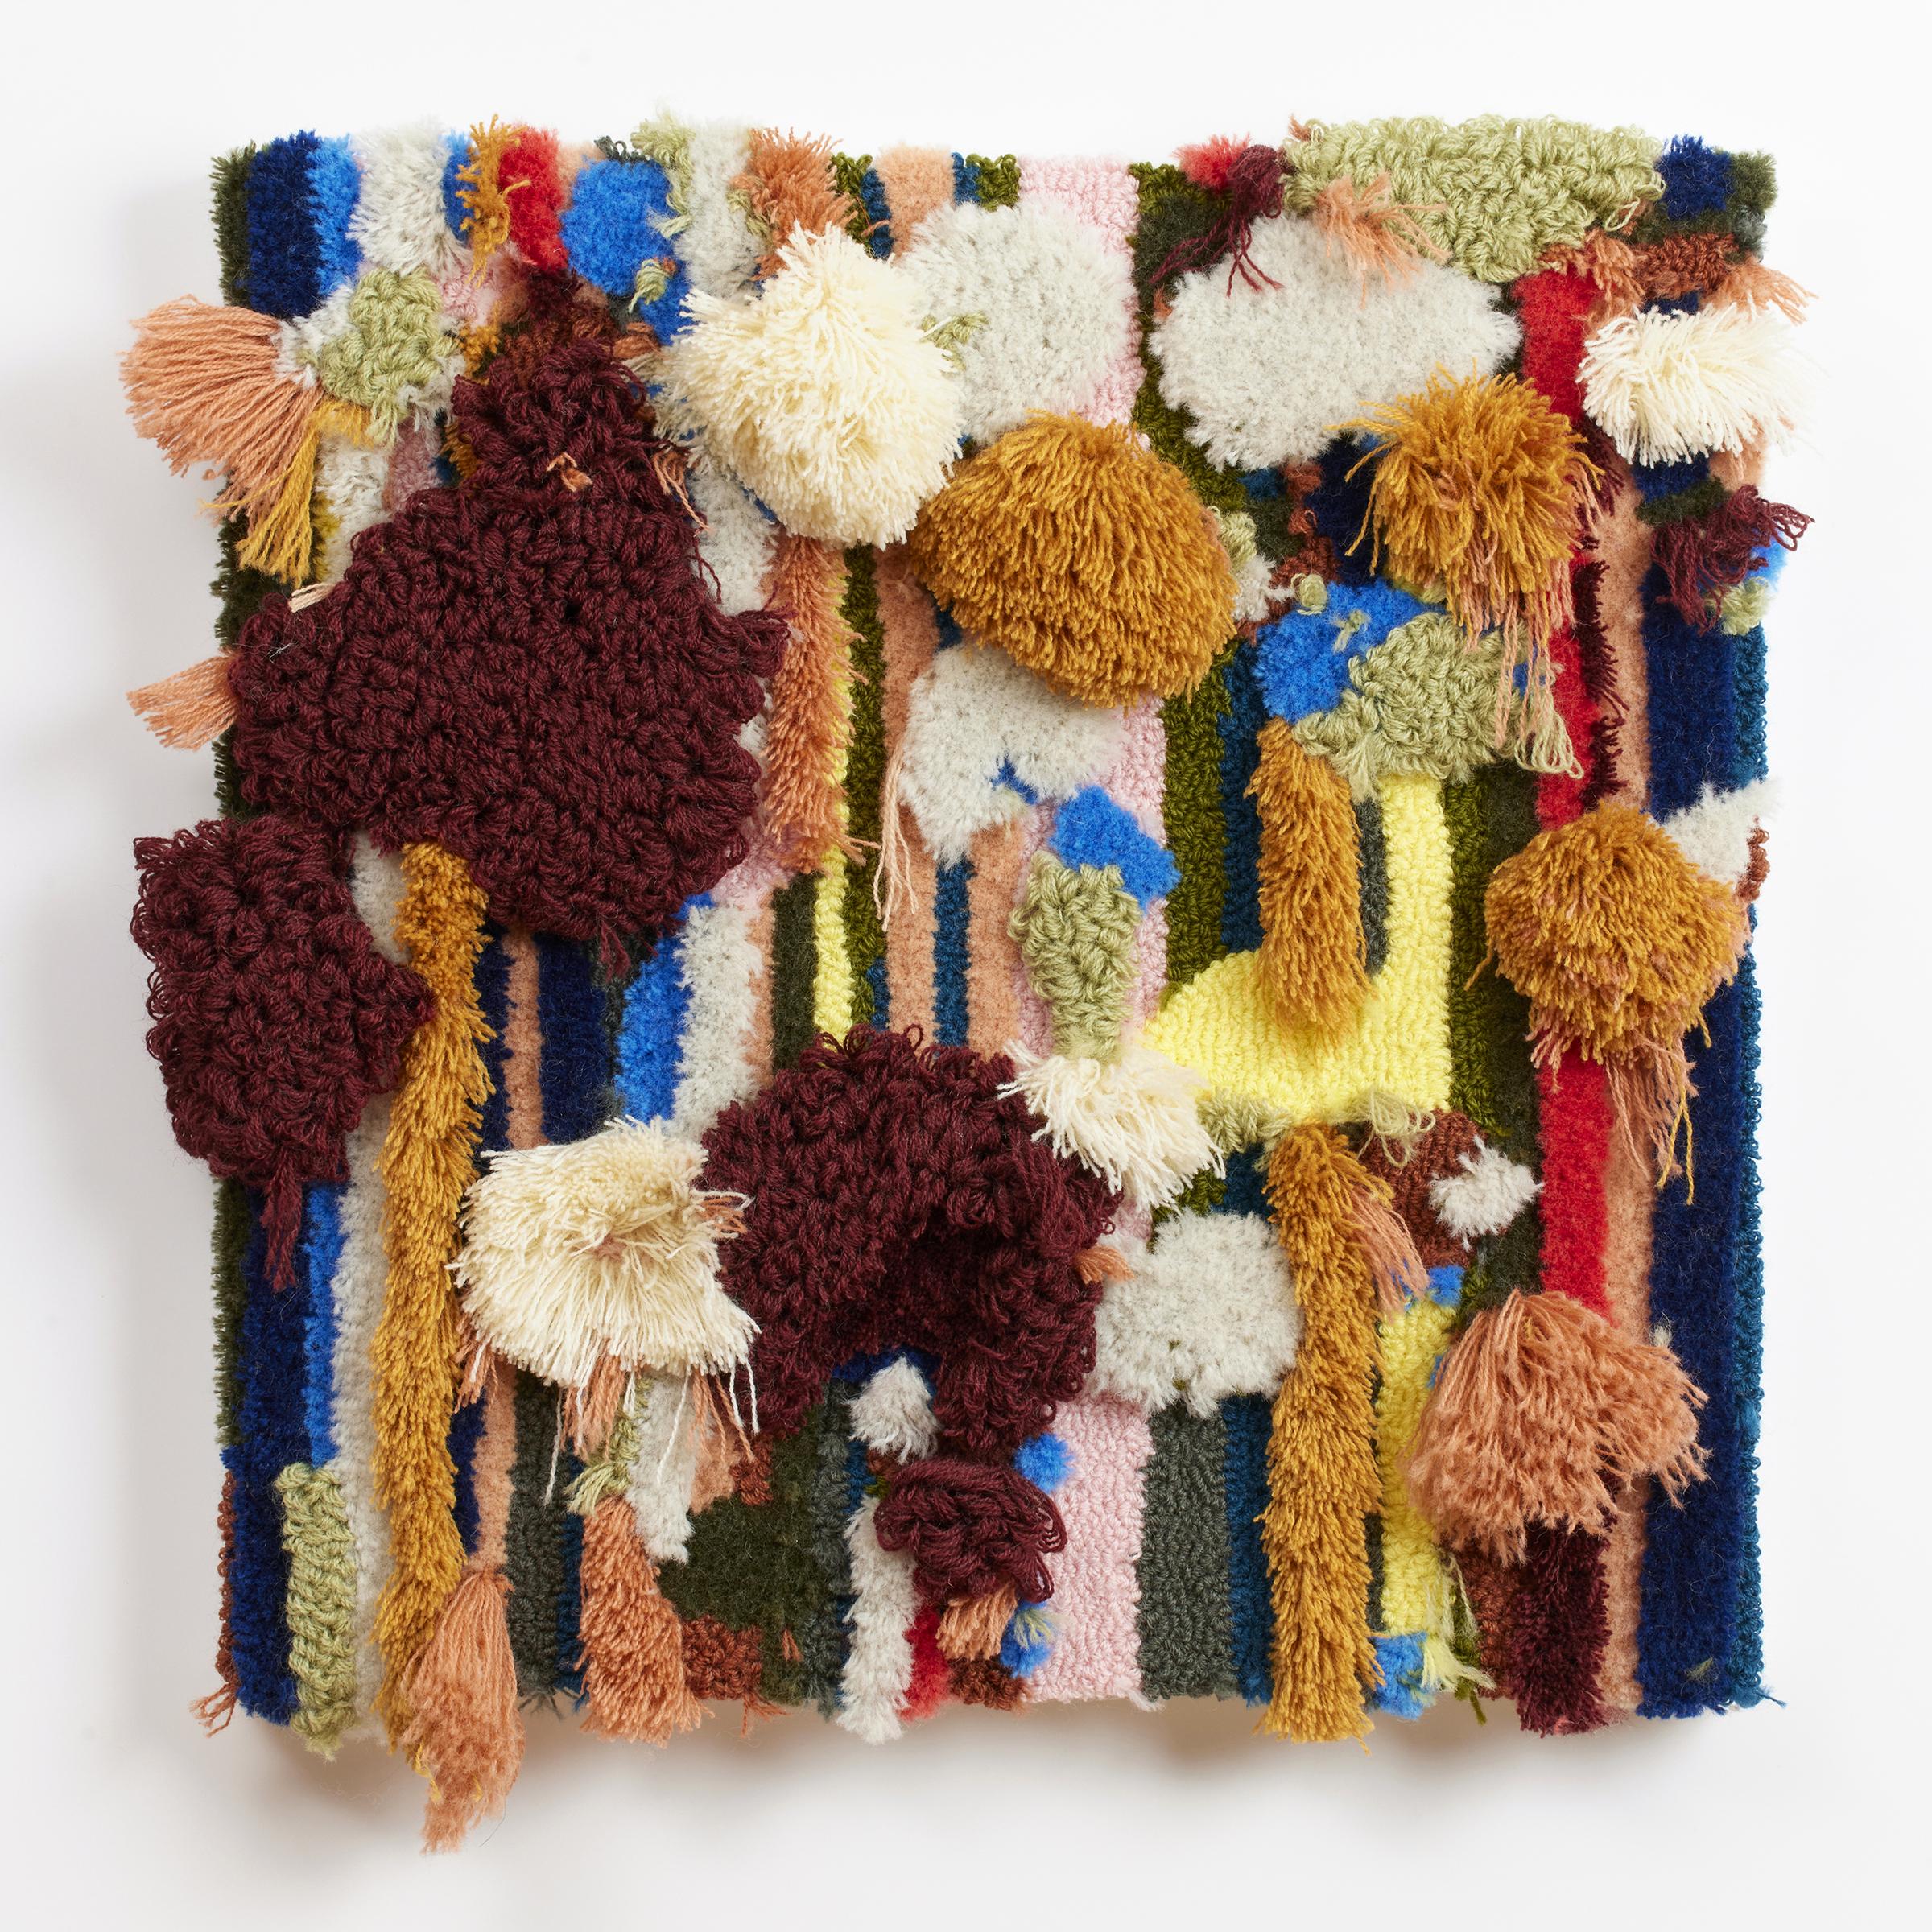 'A Tisket, A Tasket' - contemporary fiber art, textural, colorful, tufting